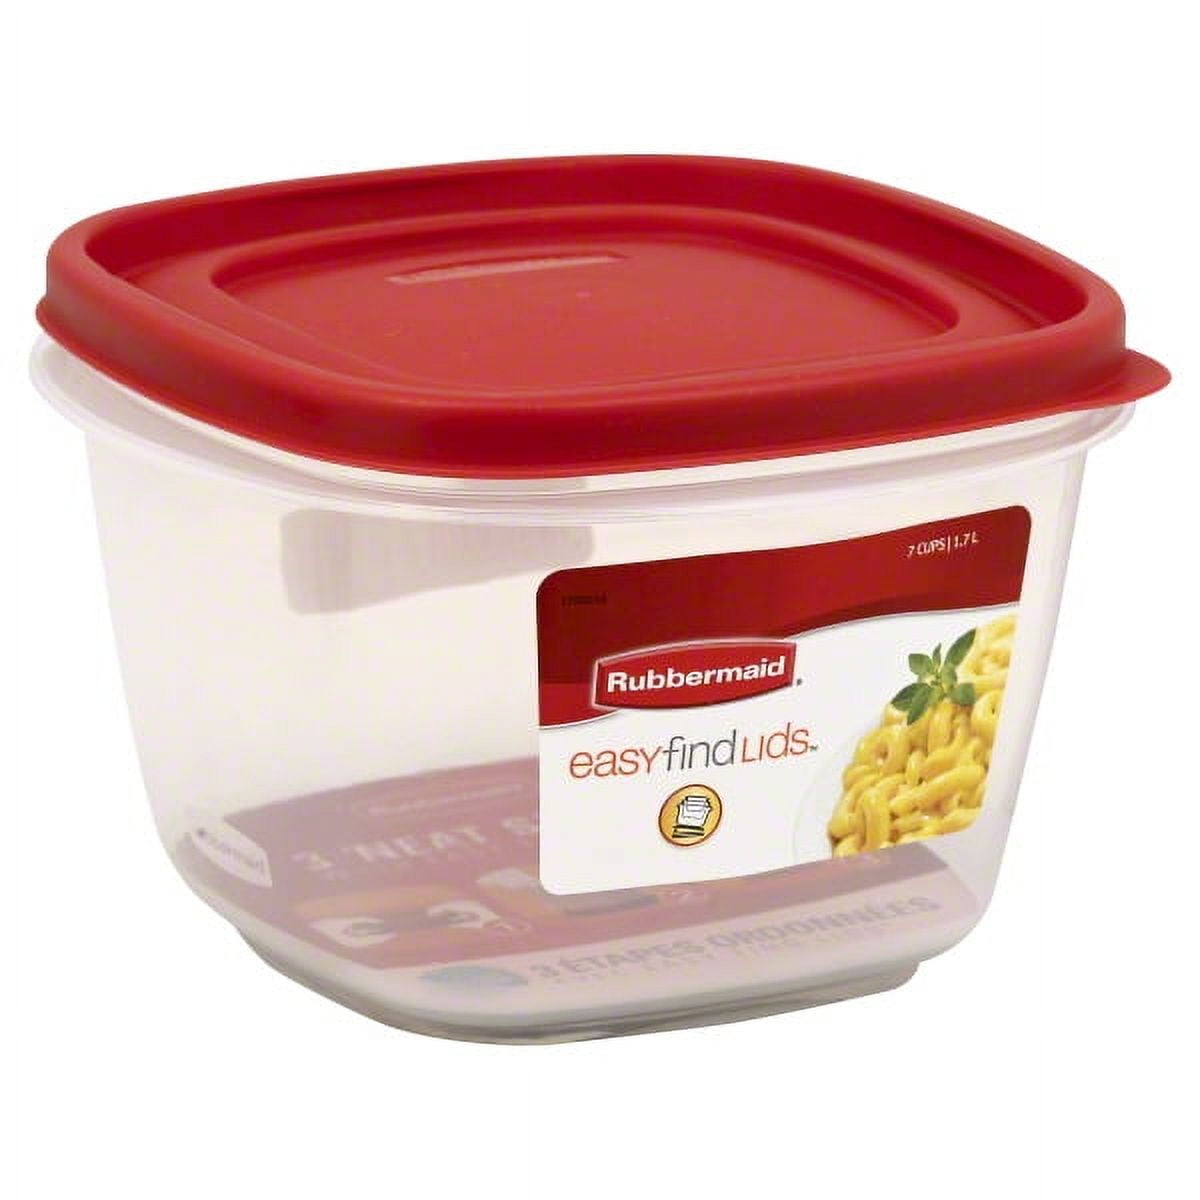 Rubbermaid 1777088 Food Storage Container 7 Cup Clear Base for sale online